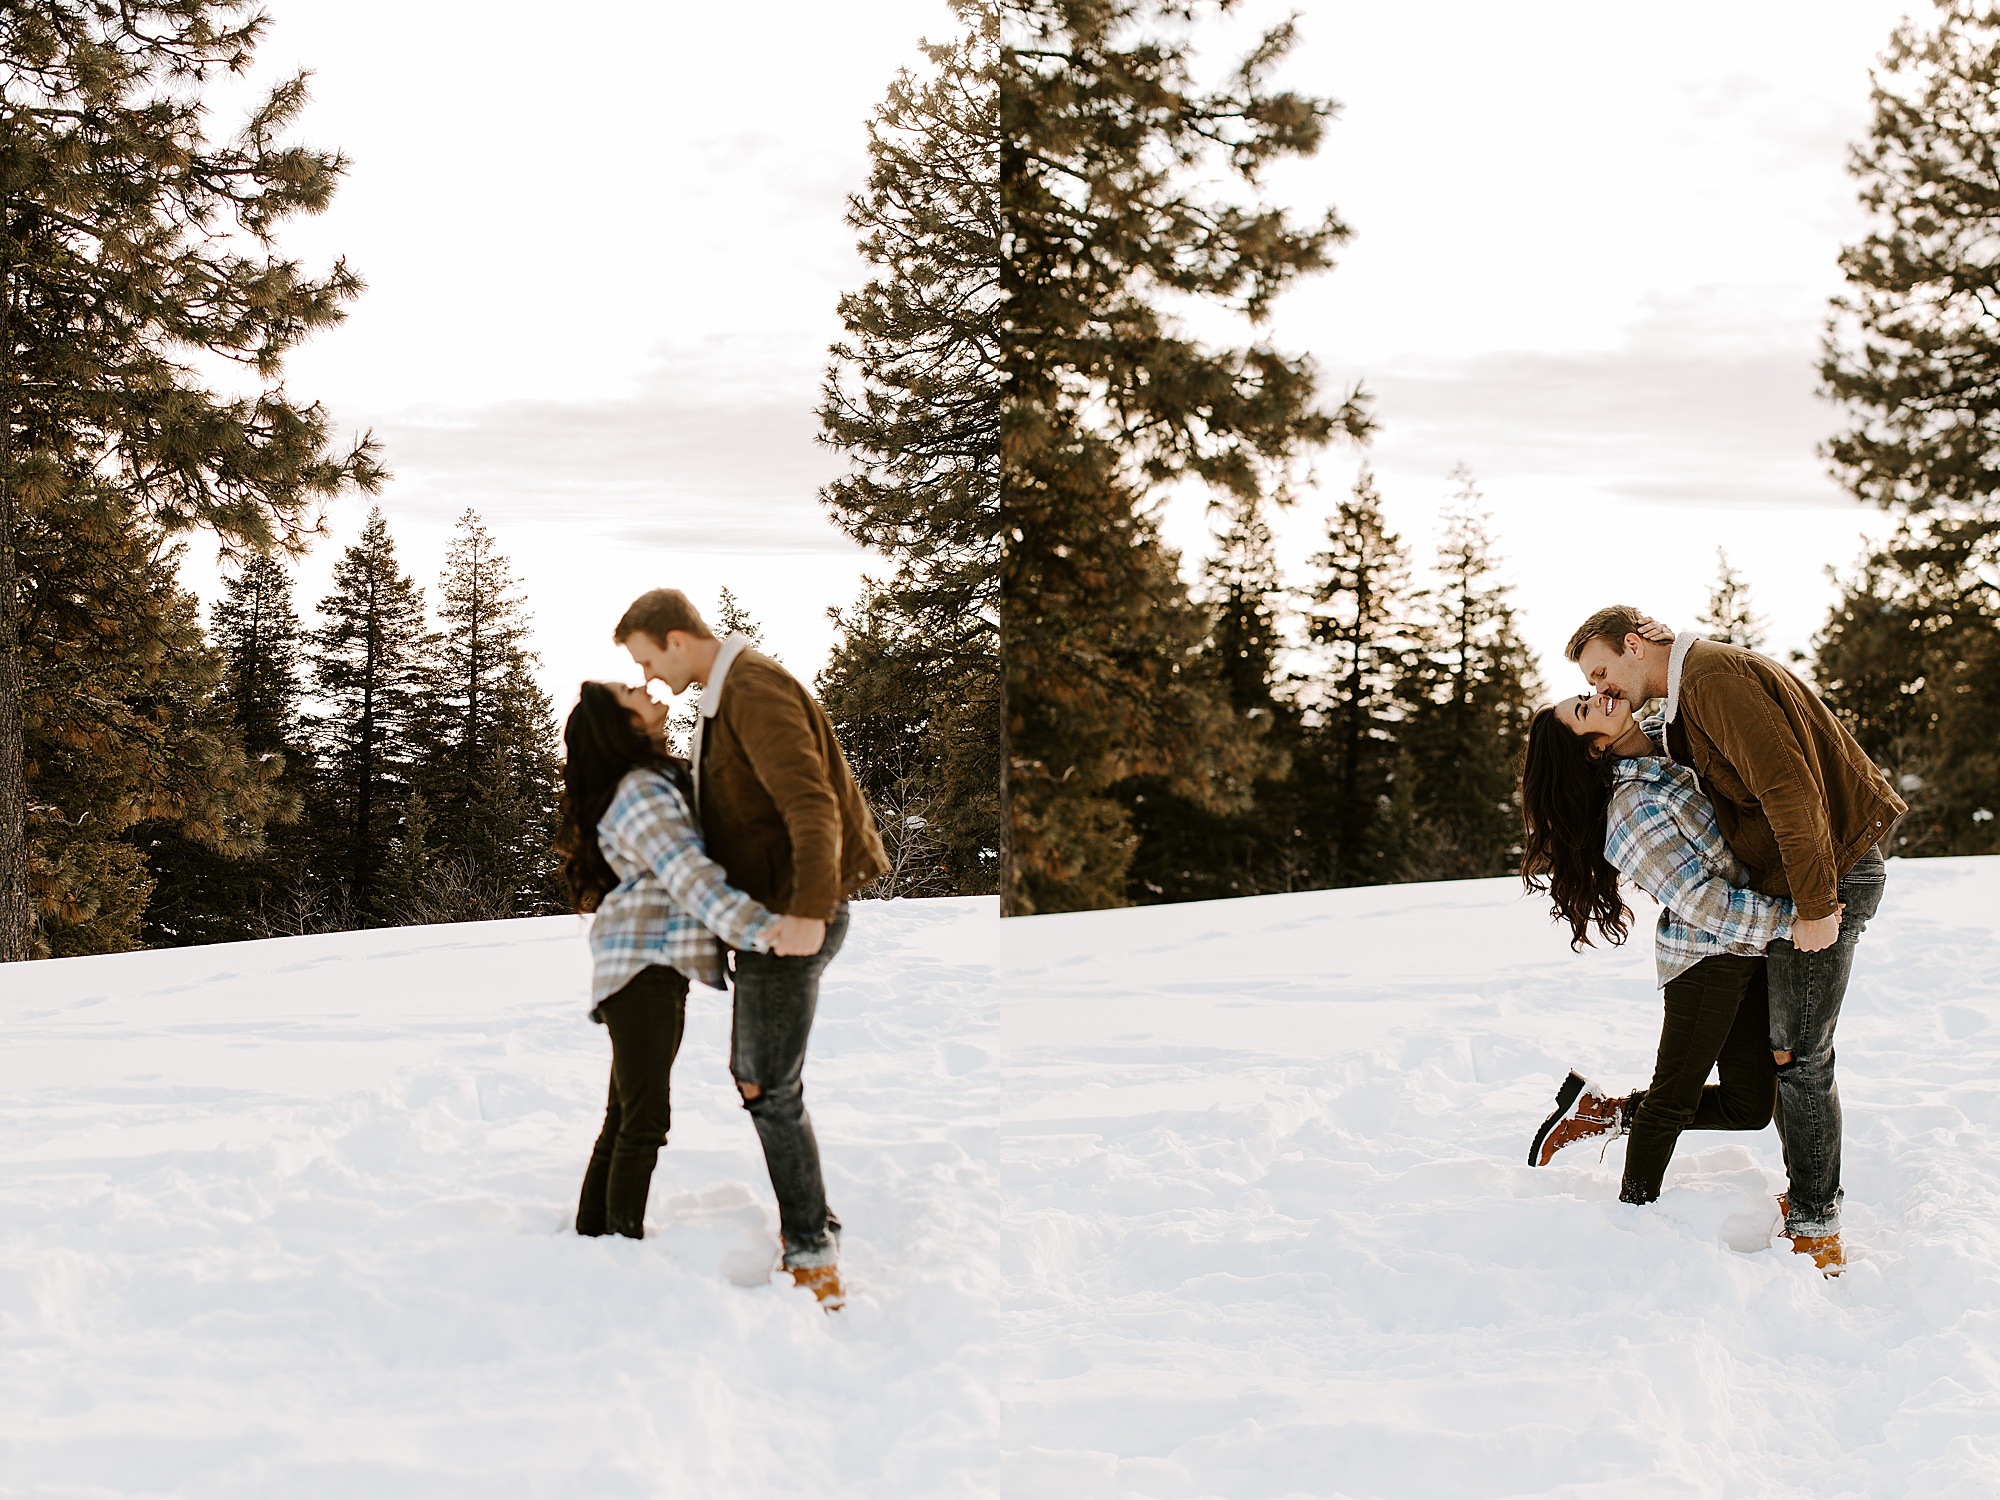 snowy mountains, snow forest, snowy couples pictures, snowy engagement photos, snowy engagement pictures, snow engagement photos outfits, snow engagement pictures outfit, snowy couple pictures, snowy couple aesthetic, snowy couple, boise idaho engagement session, boise engagement session, boise engagement photos, boise idaho engagement photography, idaho engagement session, idaho engagement pictures, idaho couples session, idaho sawtooth mountains, sawtooth mountains engagement session, couples photoshoot, couples session, couples photography, couples photos, engagement session, engagement session, engagement session poses, engagement session outfit ideas, engagement session plaid shirt, engagement session winter outfit ideas